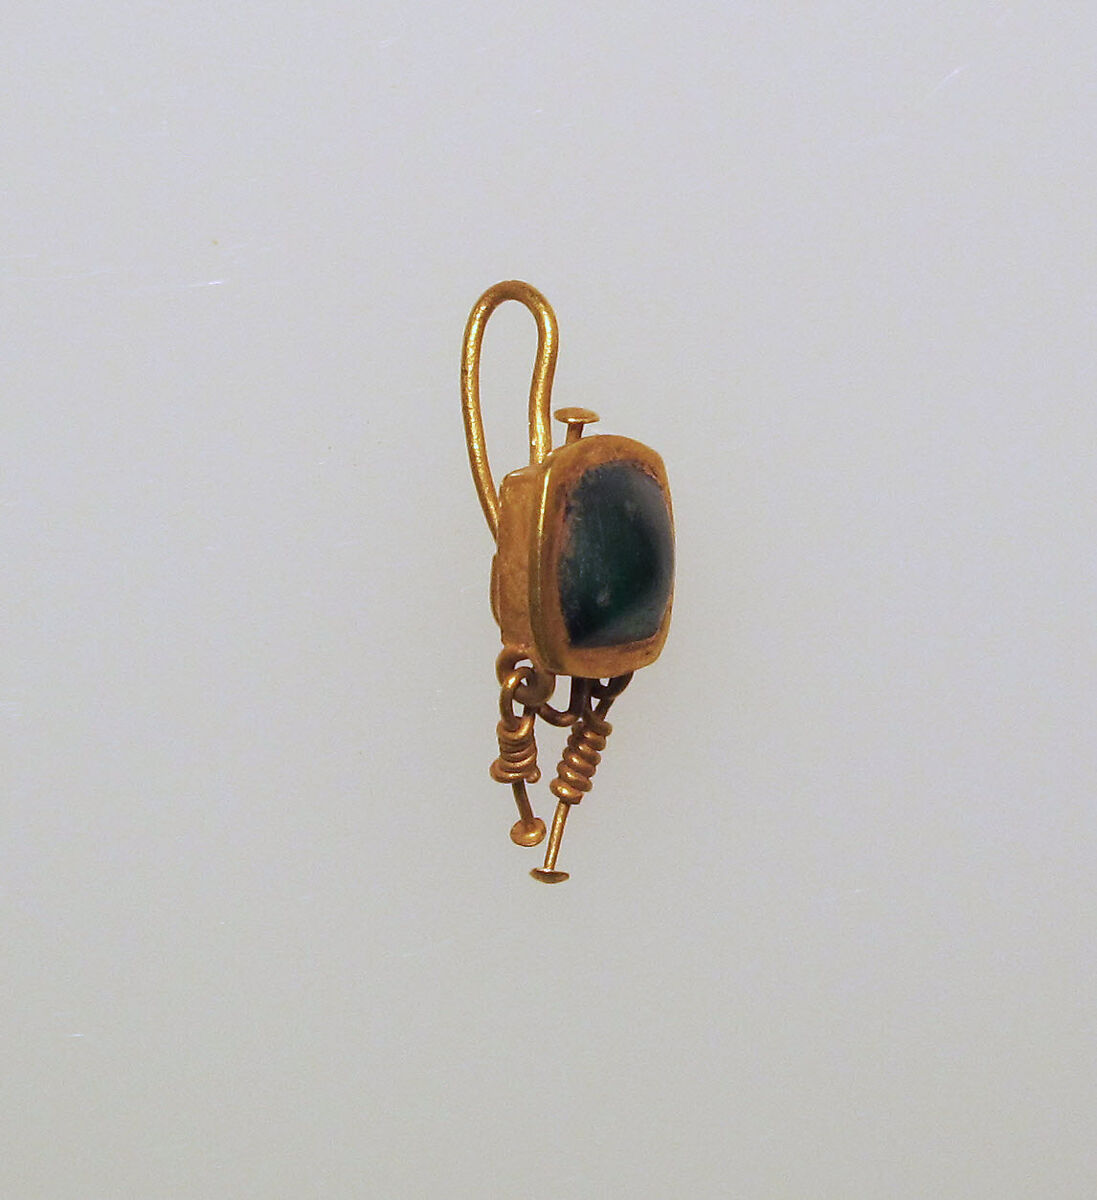 Earring-hook type with emerald setting, Gold, emerald 